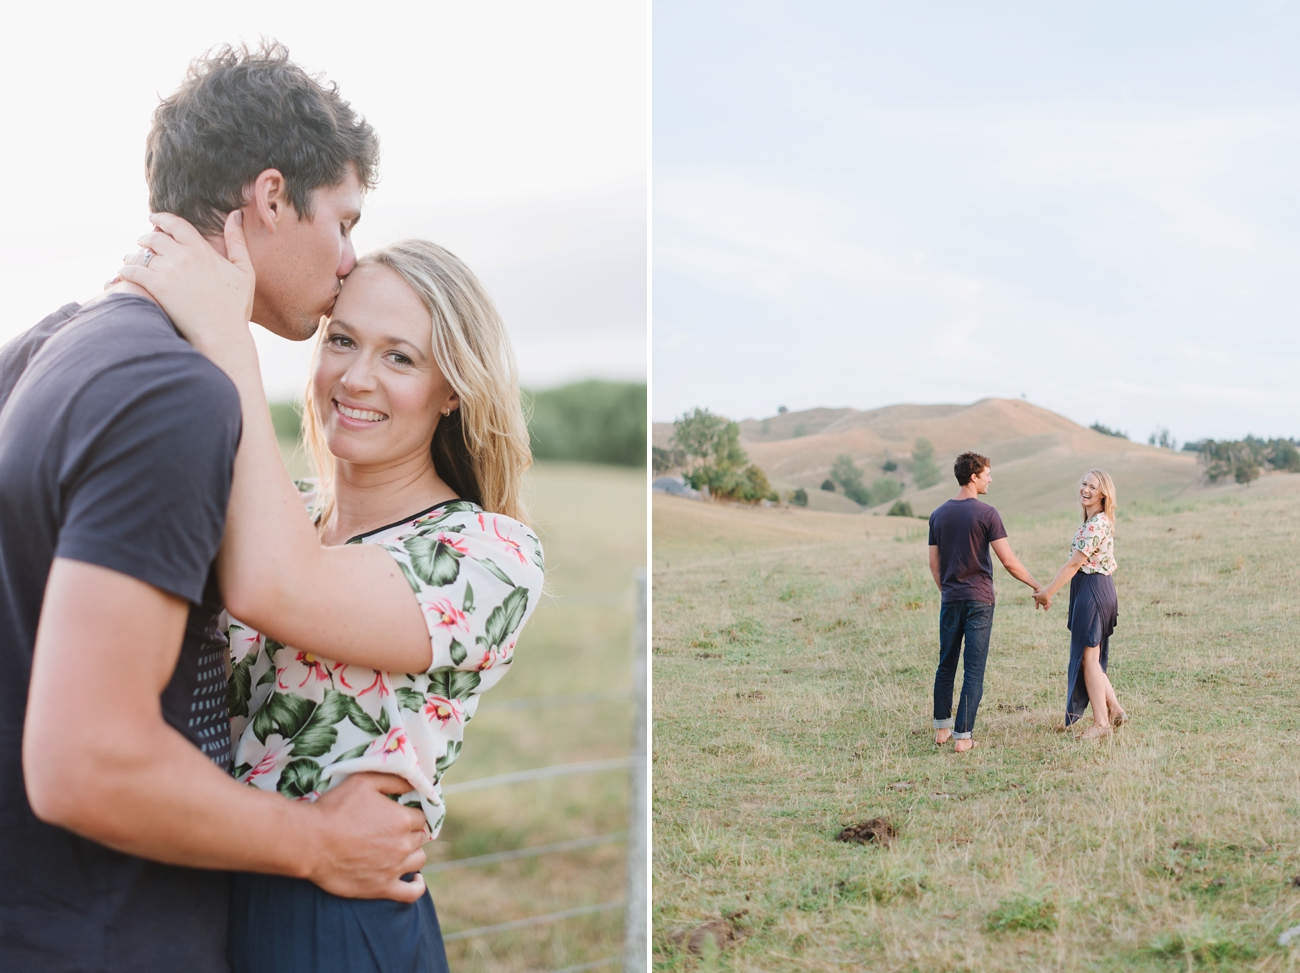 Auckland, New Zealand Anniversary Session by Natalie Franke Photography